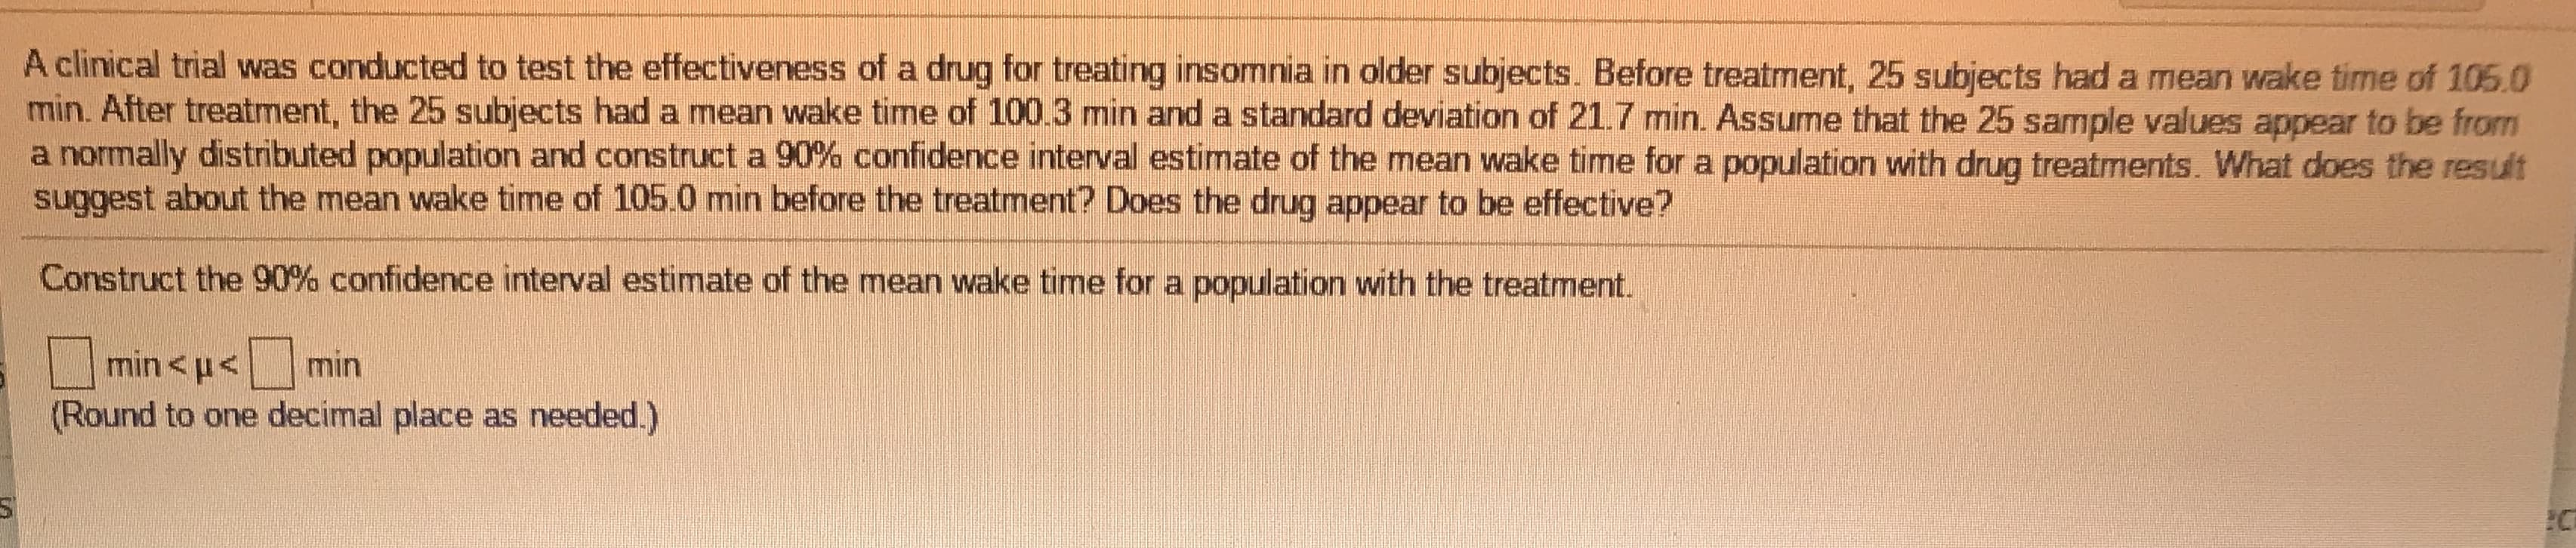 A clinical trial was conducted to test the effectiveness of a drug for treating insomnia in older subjects. Before treatment, 25 subjects had a mean wake time of 105.0
min. After treatment, the 25 subjects had a mean wake timne of 100.3 min and a standard deviation of 21.7 min. Assume that the 25 sample values appear to be from
a normally distributed population and construct a 90% confidence interval estimate of the mean wake time for a population with drug treatments. What does the result
suggest about the mean wake time of 105.0 min before the treatment? Does the drug appear to be effective?
Construct the 90% confidence interval estimate of the mean wake time for a population with the treatment.
min <u<
min
(Round to one decimal place as needed.)
